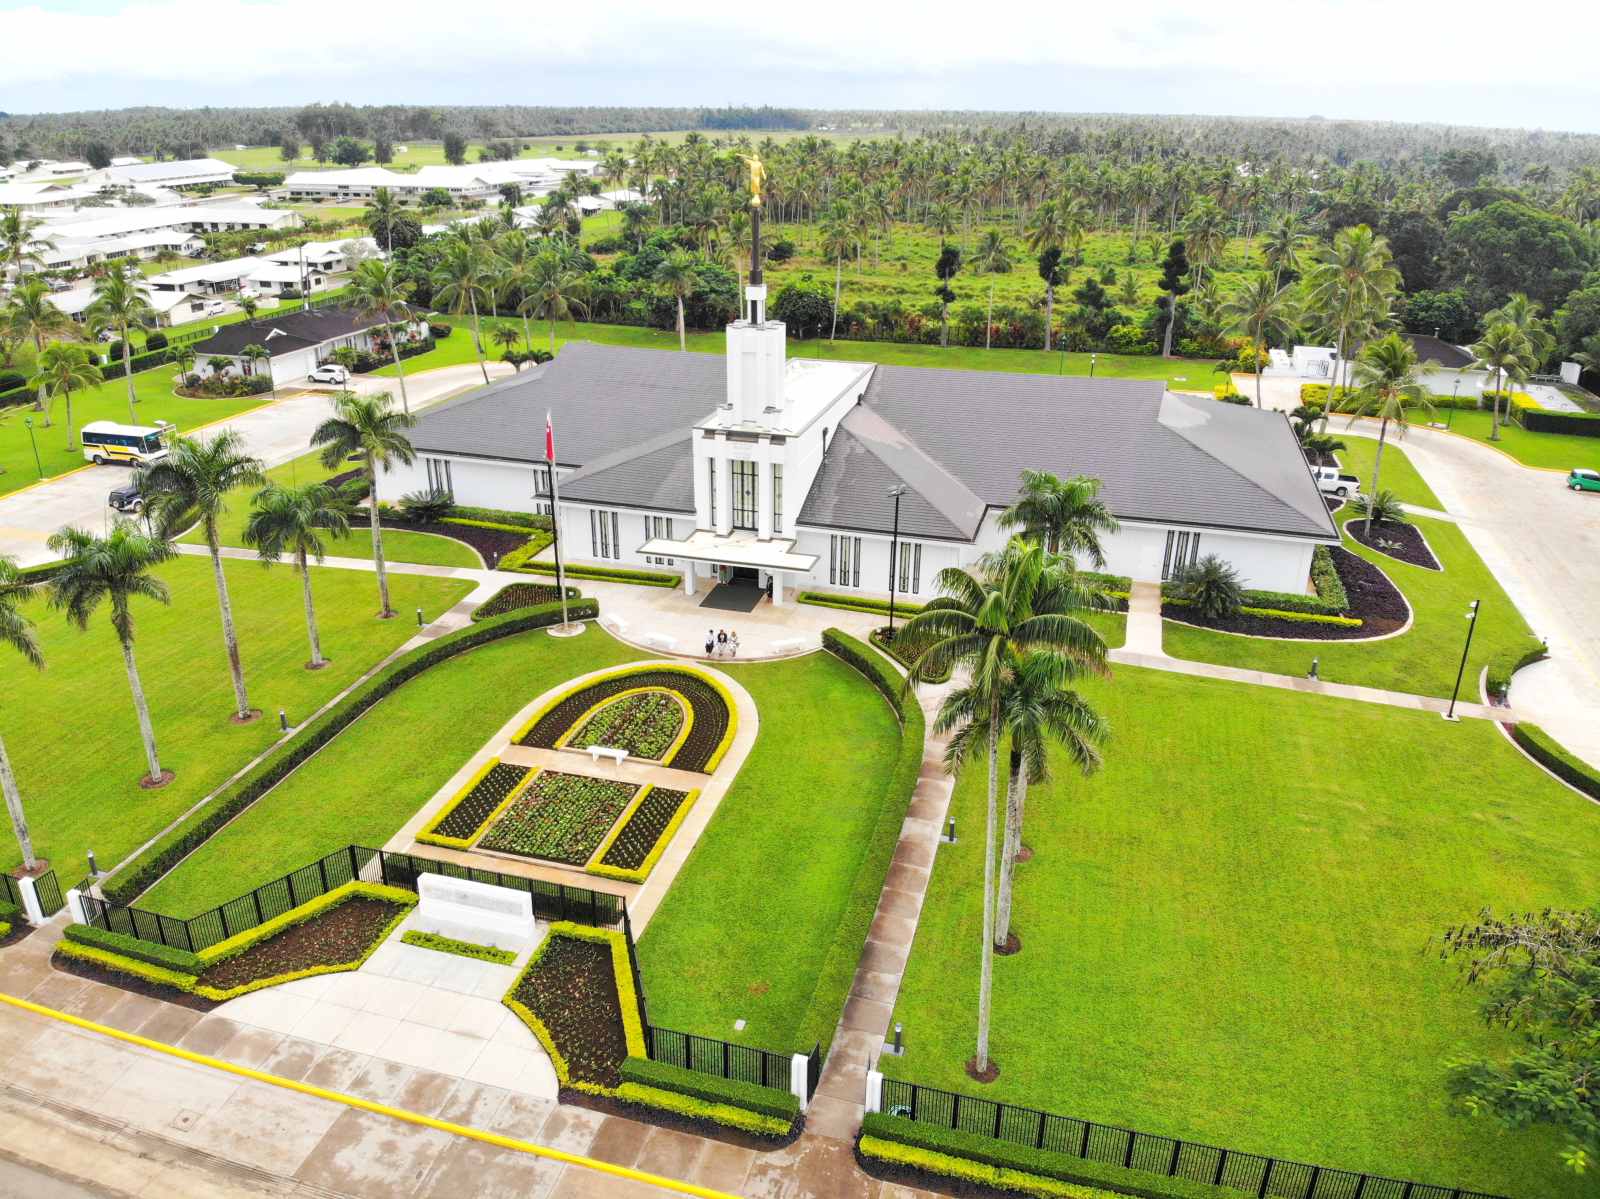 The Best Churches in Nuku’alofa to Experience as a Visitor